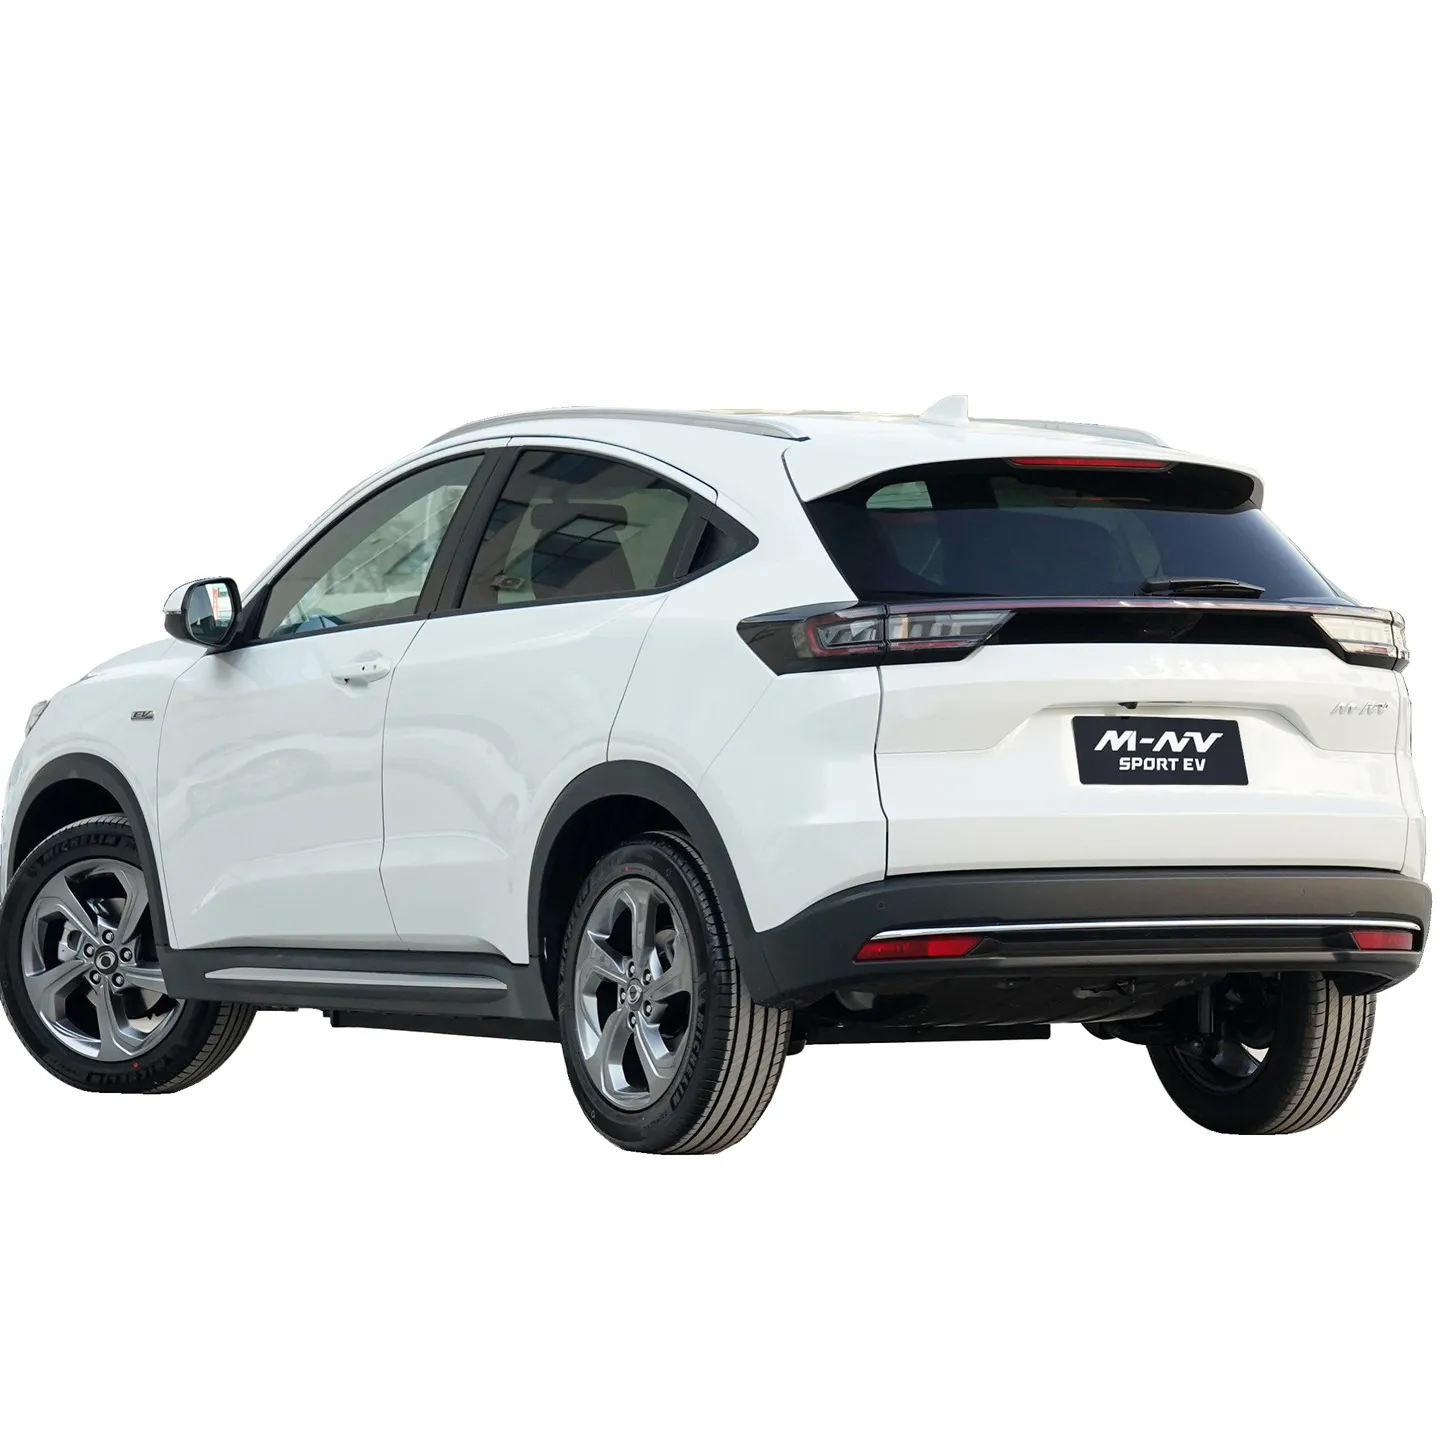 4x2 2WD FWD compact suv torque 280nm 120kw 163hp green evs M-NV auto cars MNV electric car motor with phone wireless charge